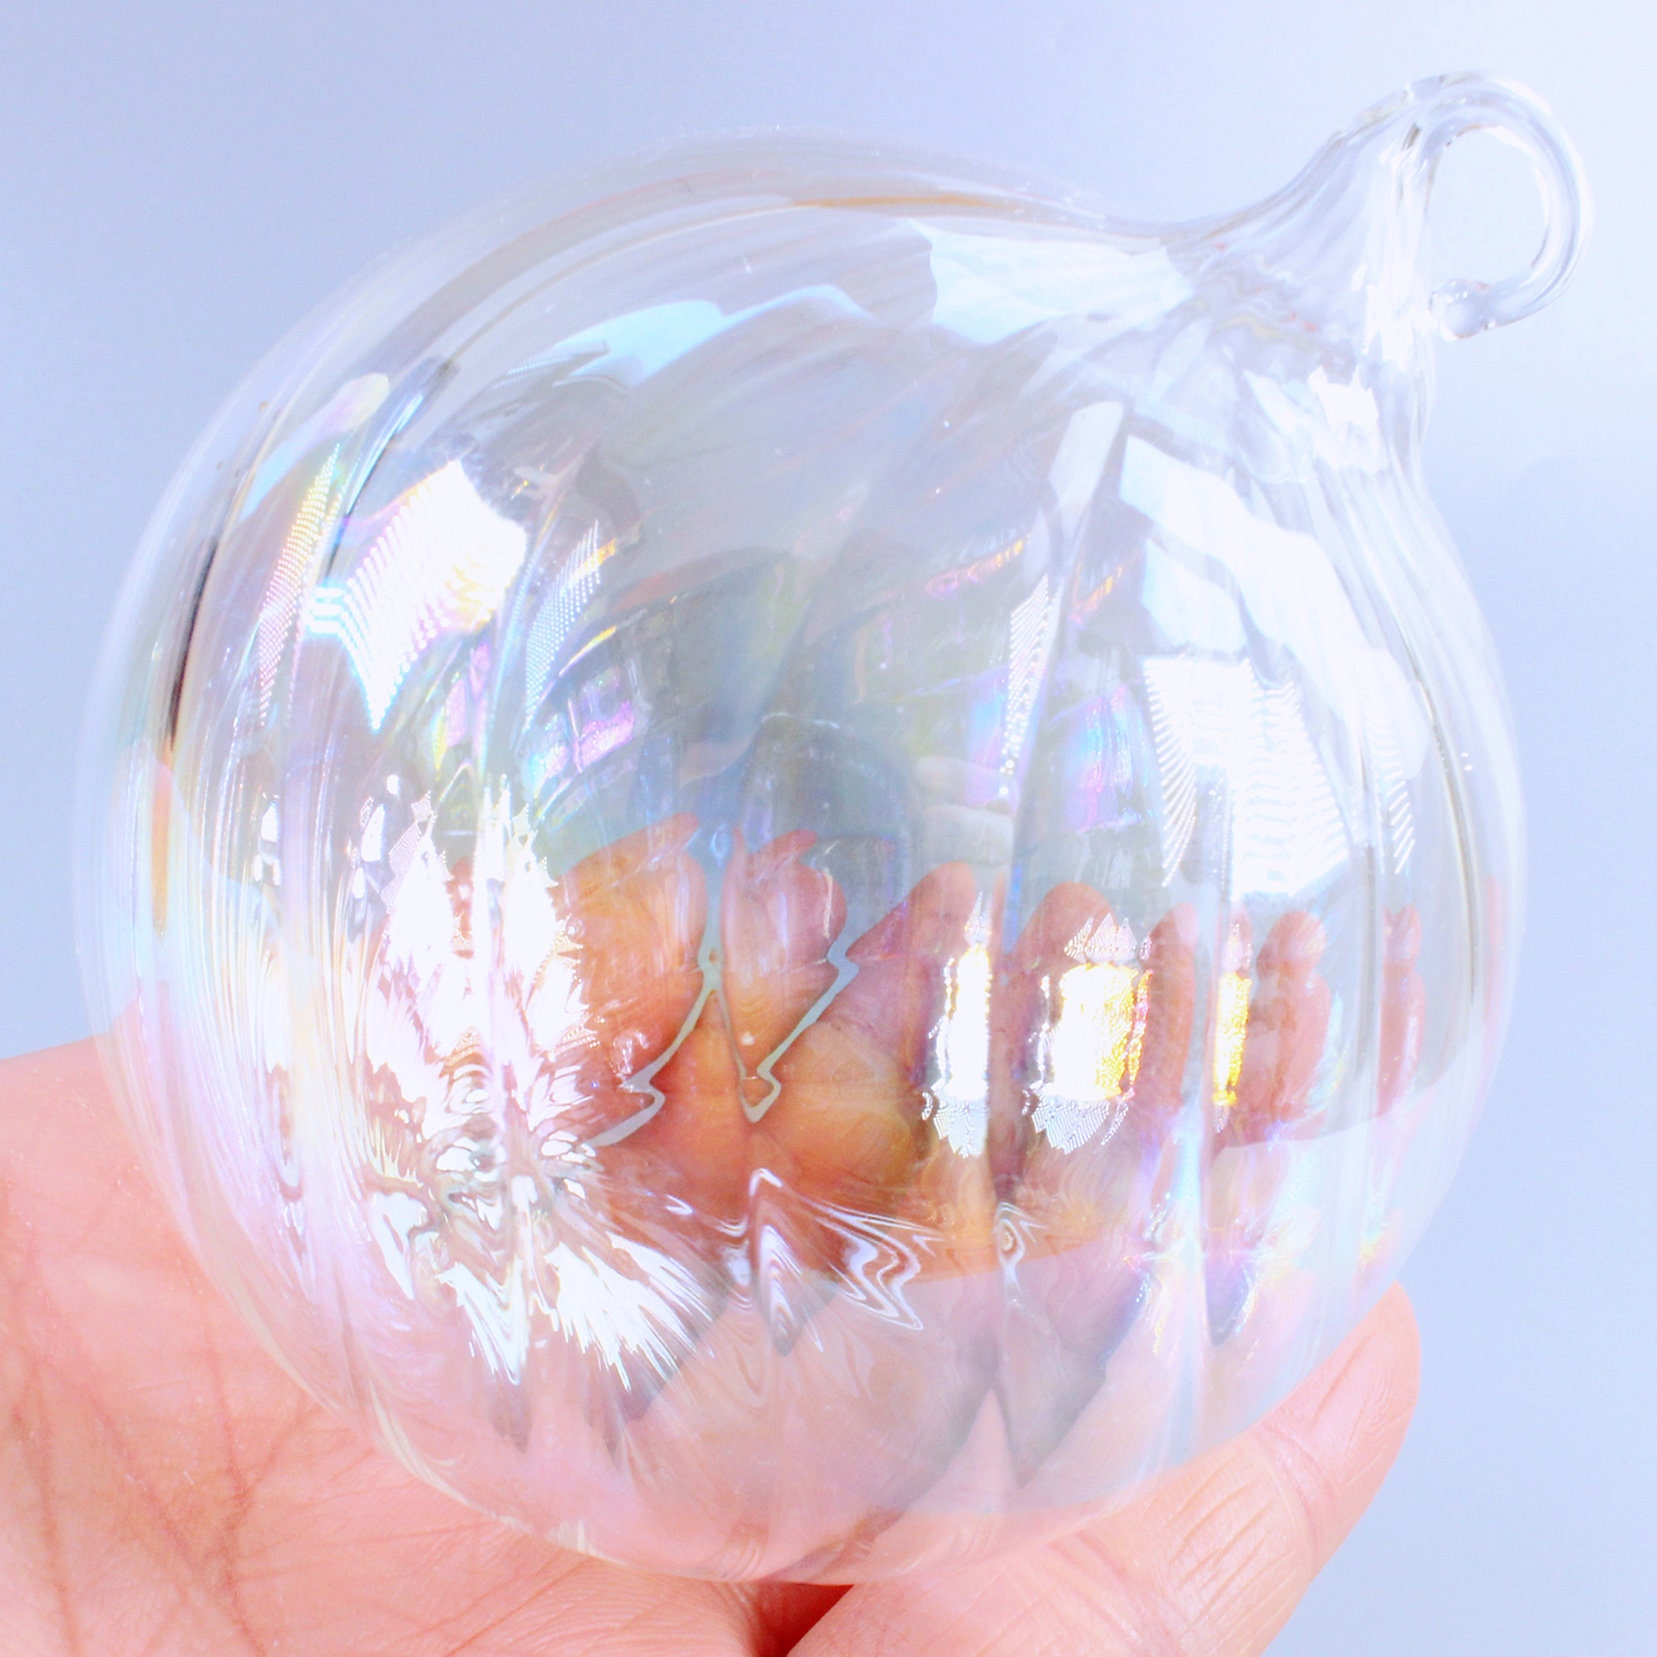 Darice Plastic Fillable Ornaments 6 Pack With a Opening in the Front  Terrarium 